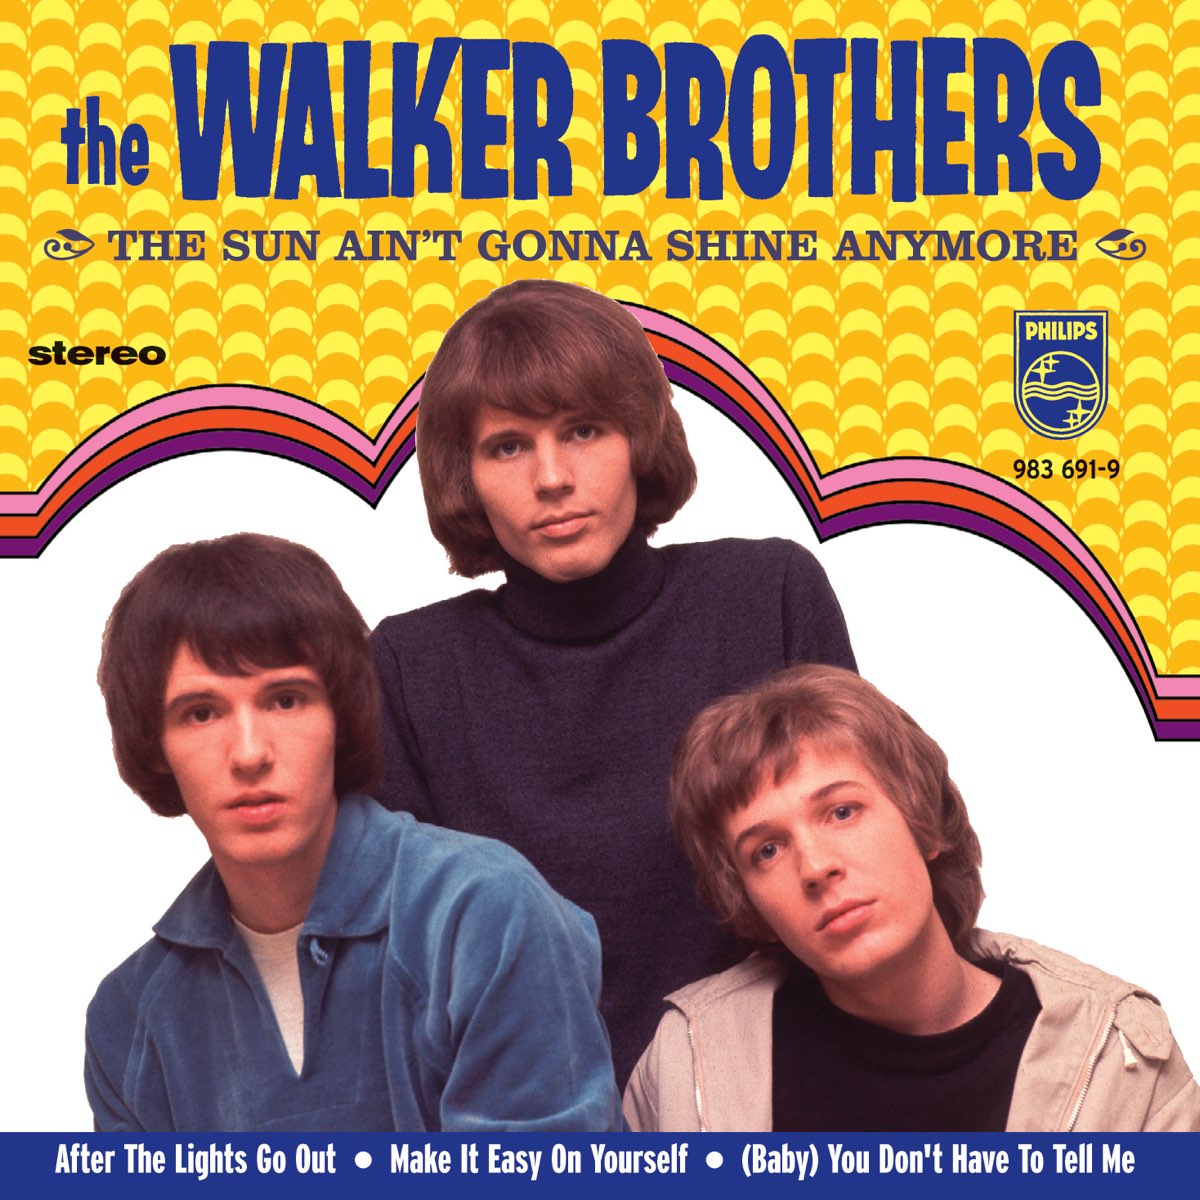 The Sun Ain't Gonna Shine Anymore - EP - Album by The Walker Brothers -  Apple Music